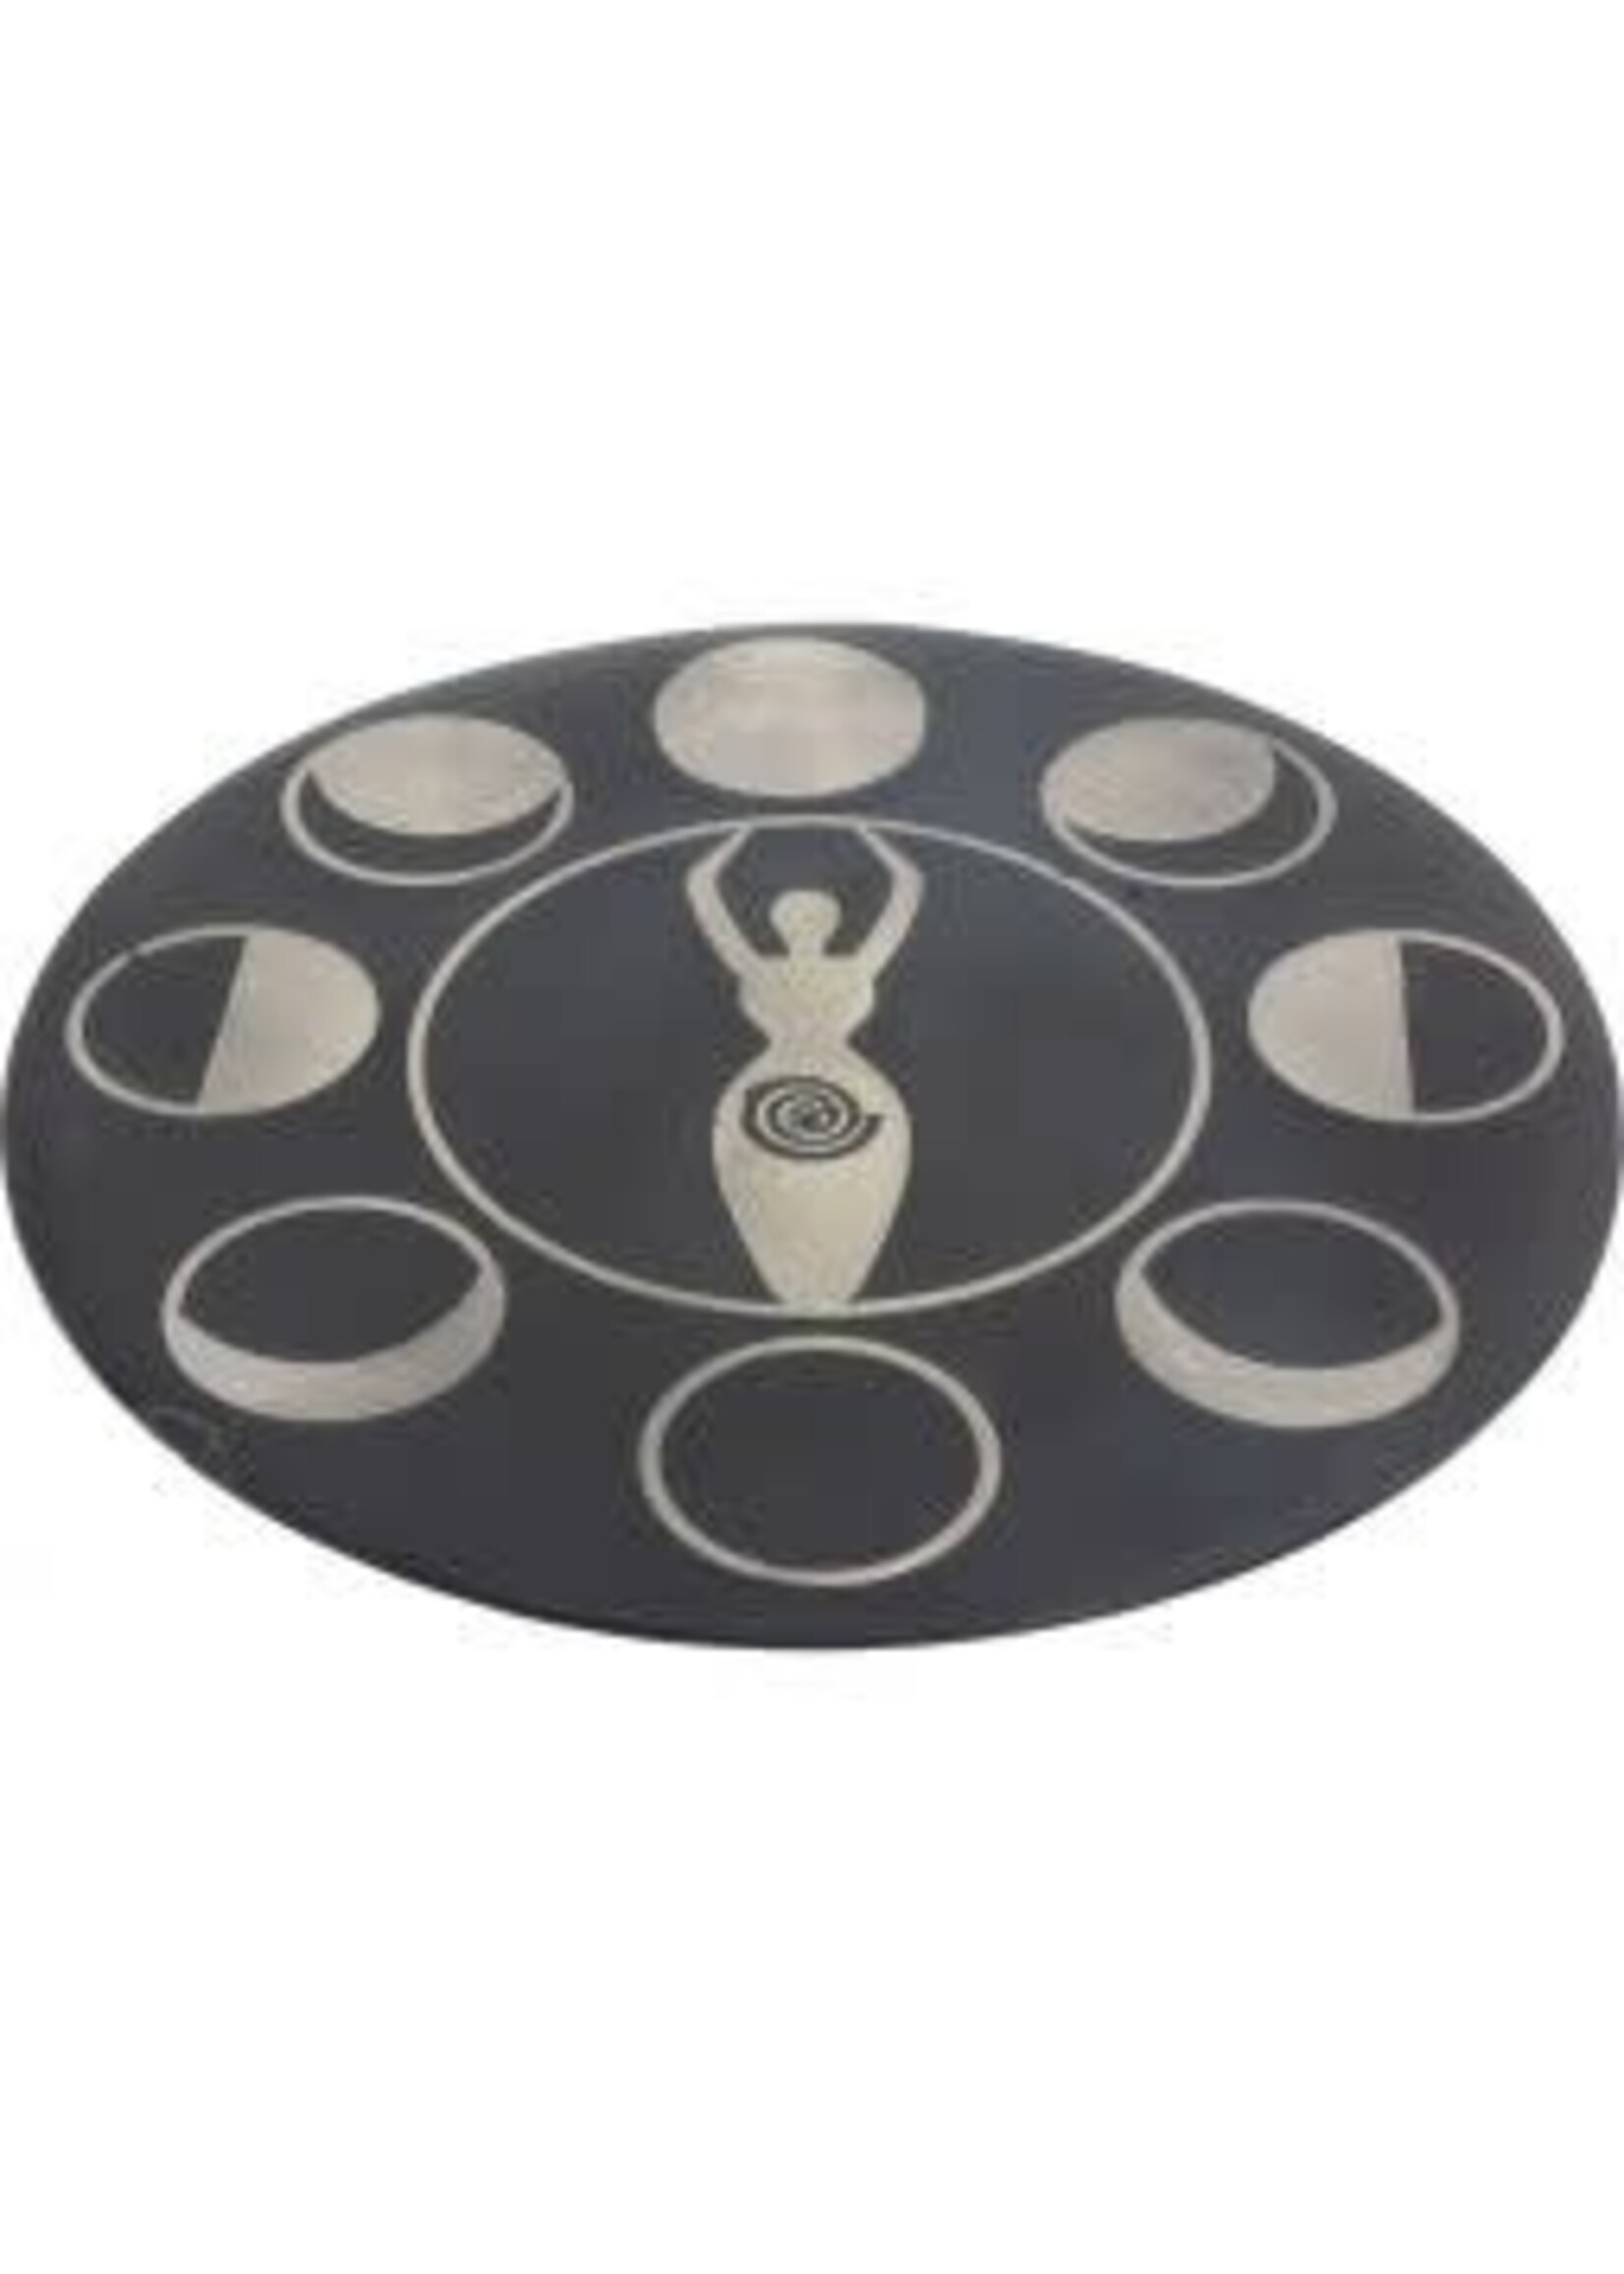 Soapstone Round Incense Holder w/ Silver Inlay - Moon Phases, Goddess